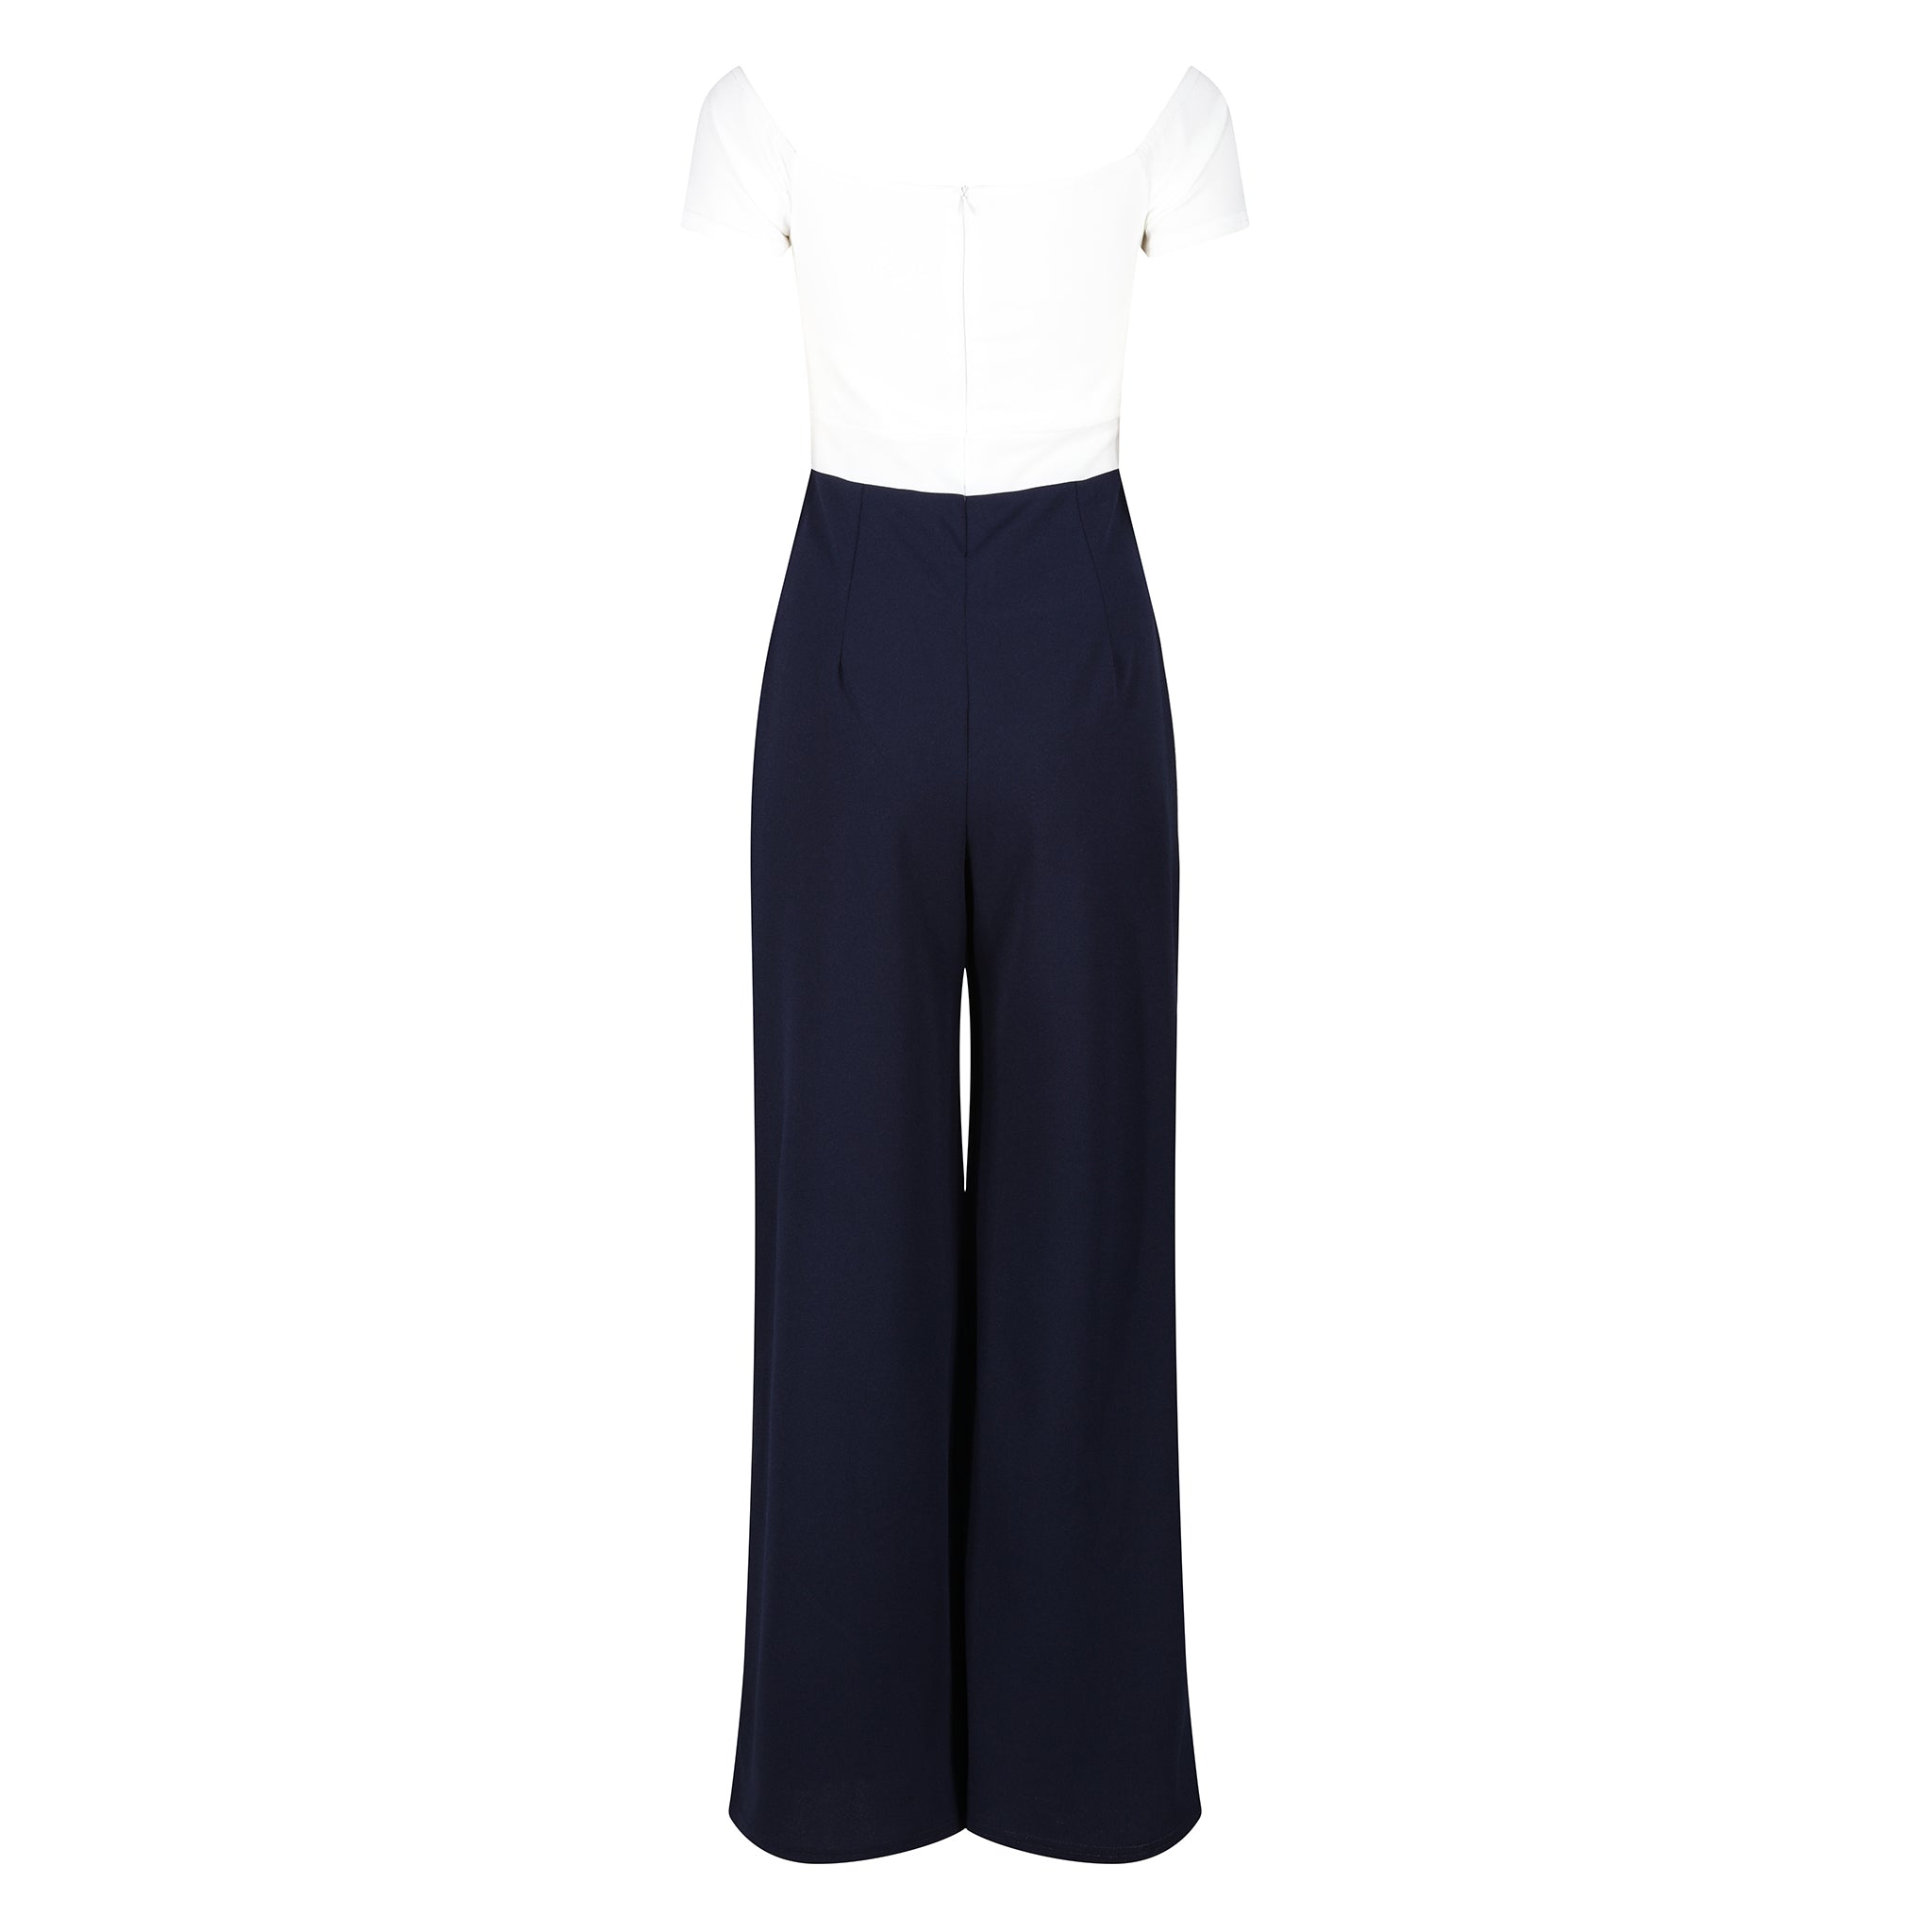 Ivory Bardot Top and Navy Cropped Trouser-suit